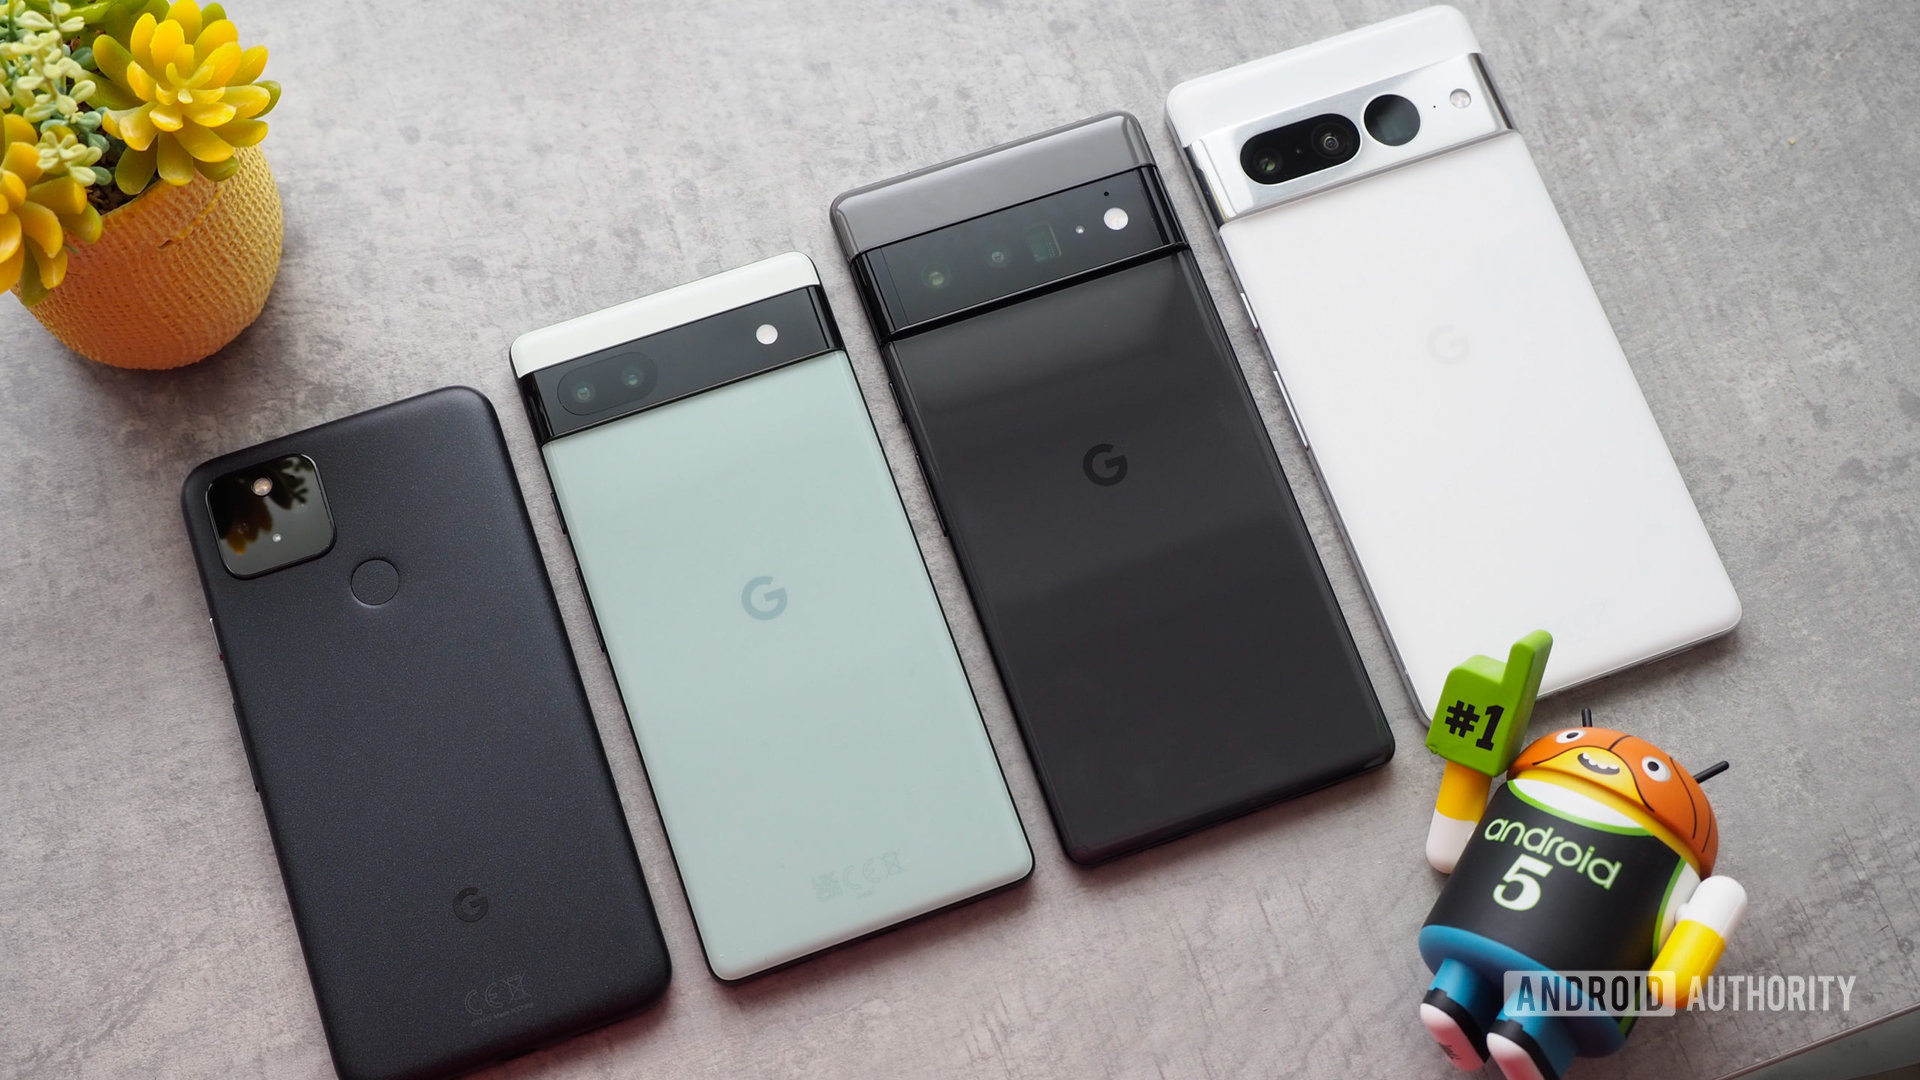 Google Pixel family with the Pixel 5, Pixel 6a, Pixel 6 Pro, and Pixel 7 Pro next to each other